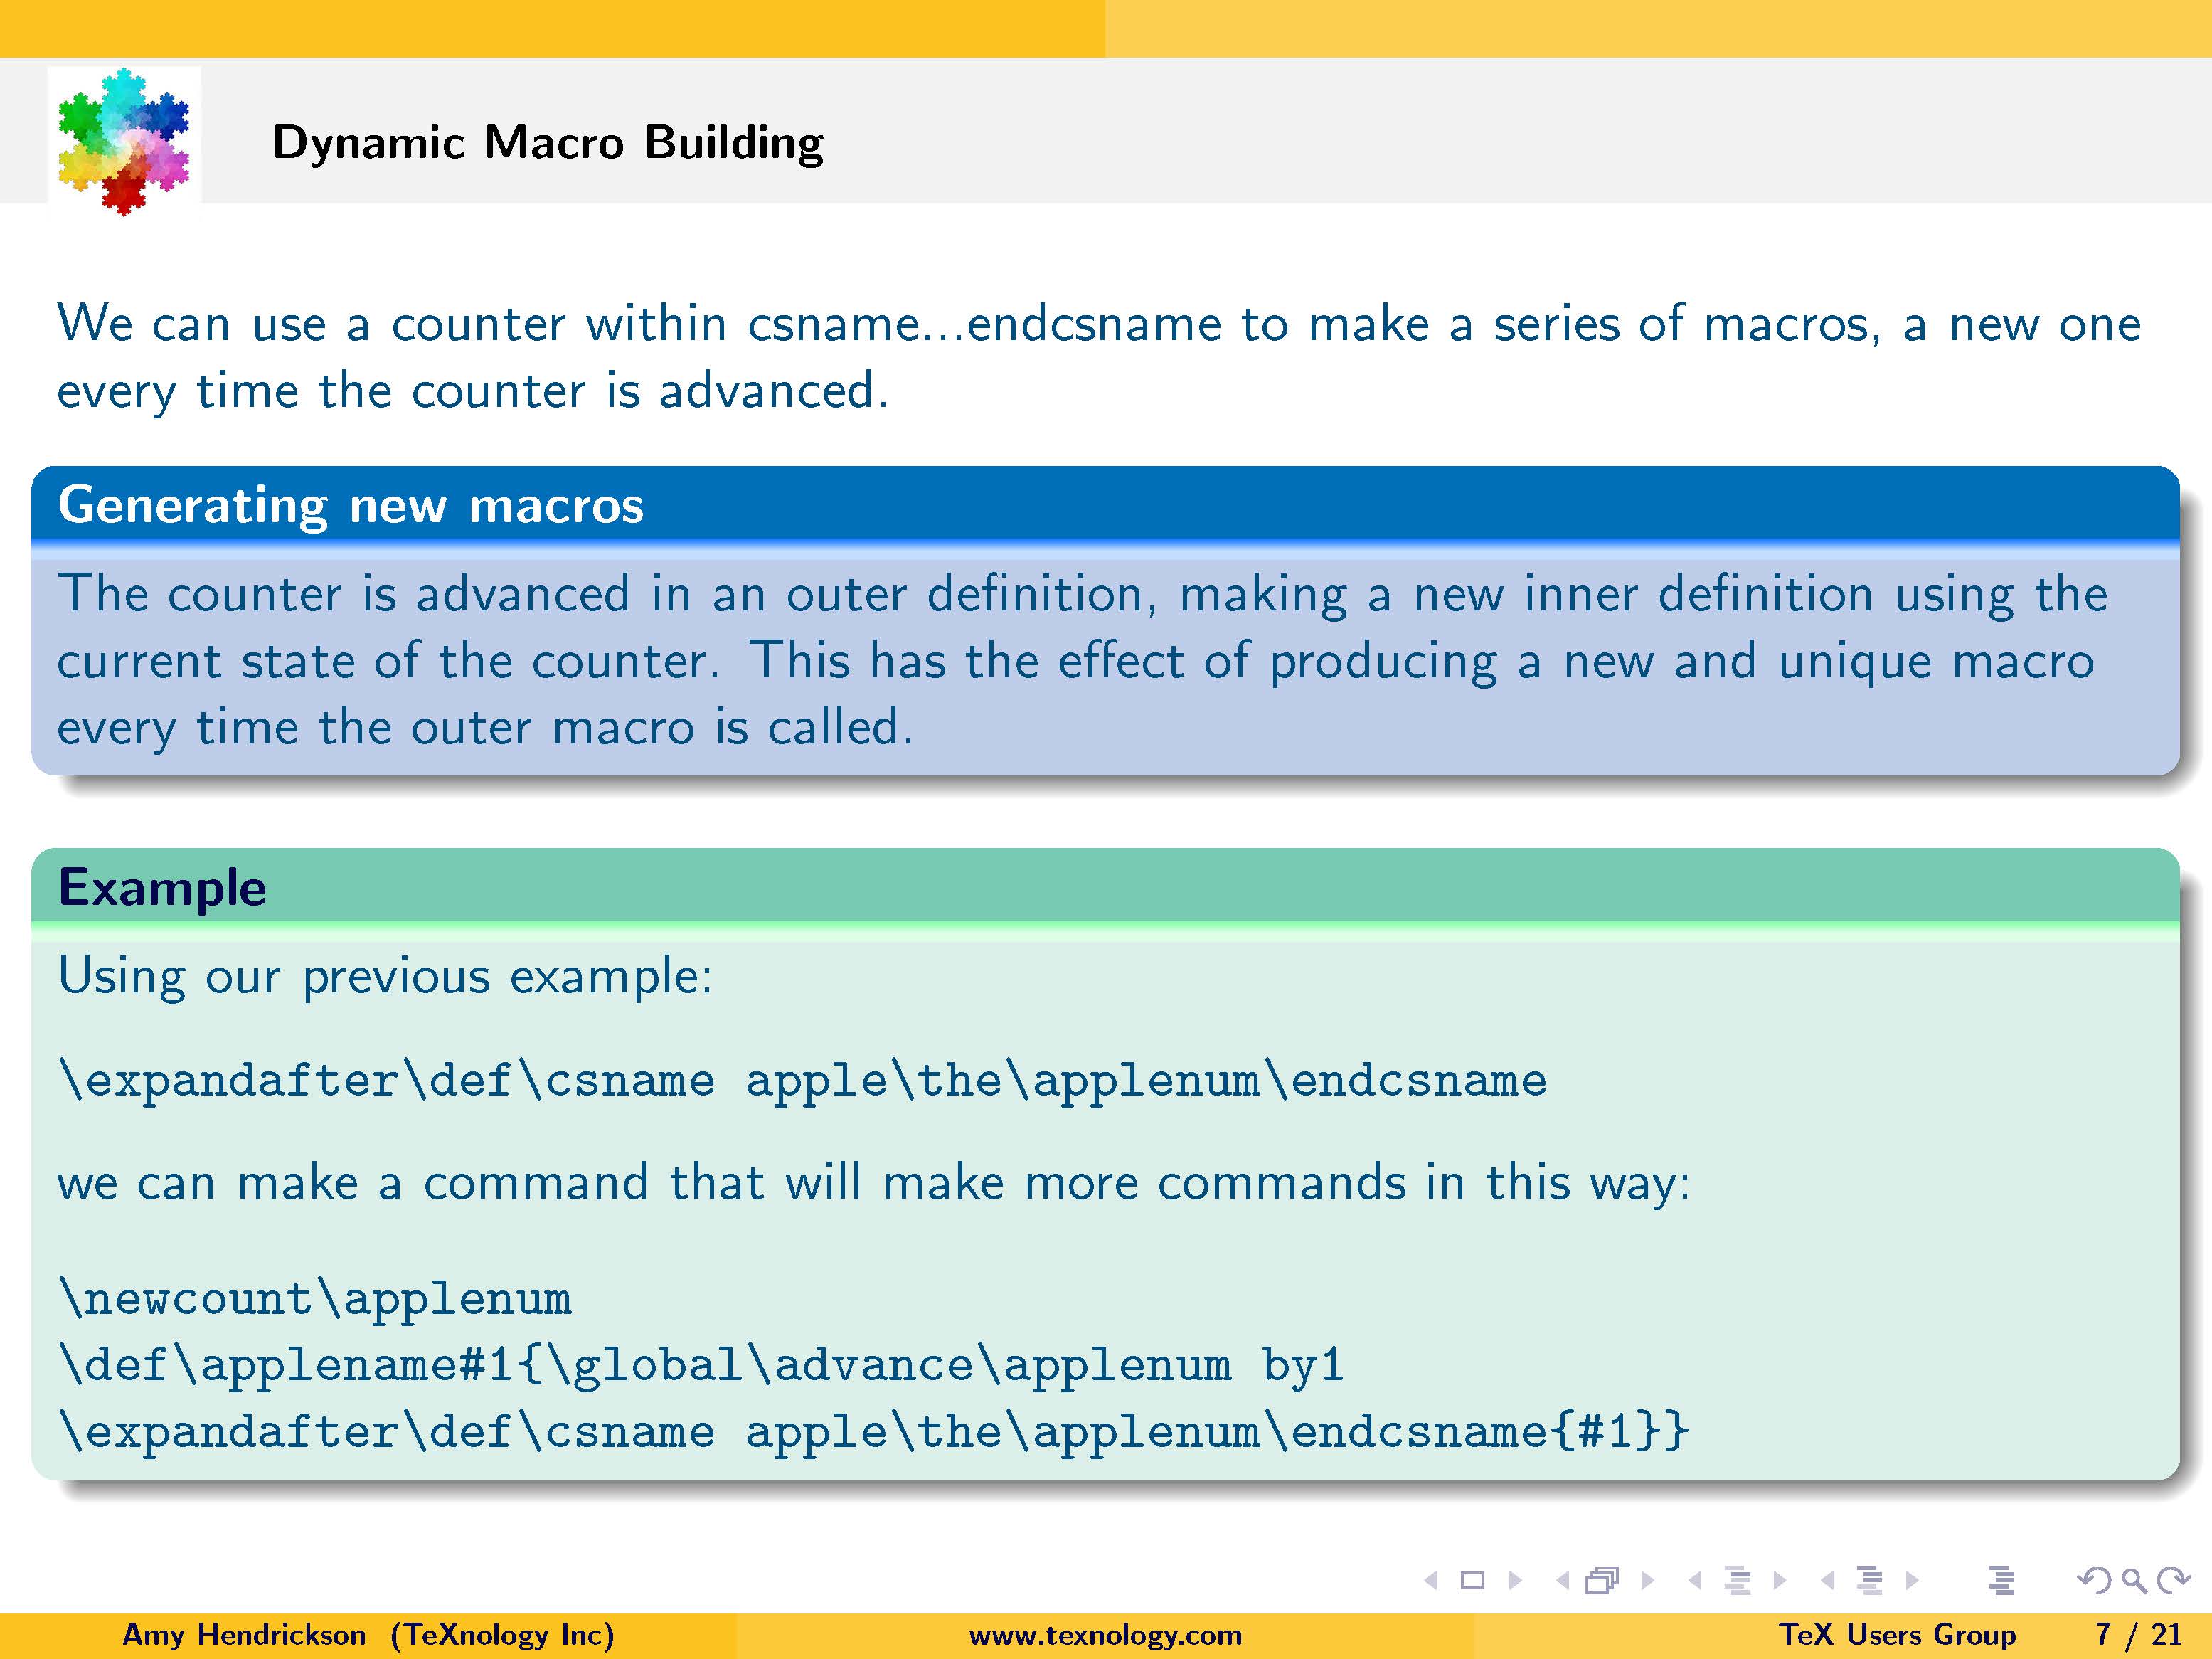 Macro Writing: Sample of code for dynamic macro building in LaTeX.
     Click on image to link to page on Macro Writing.